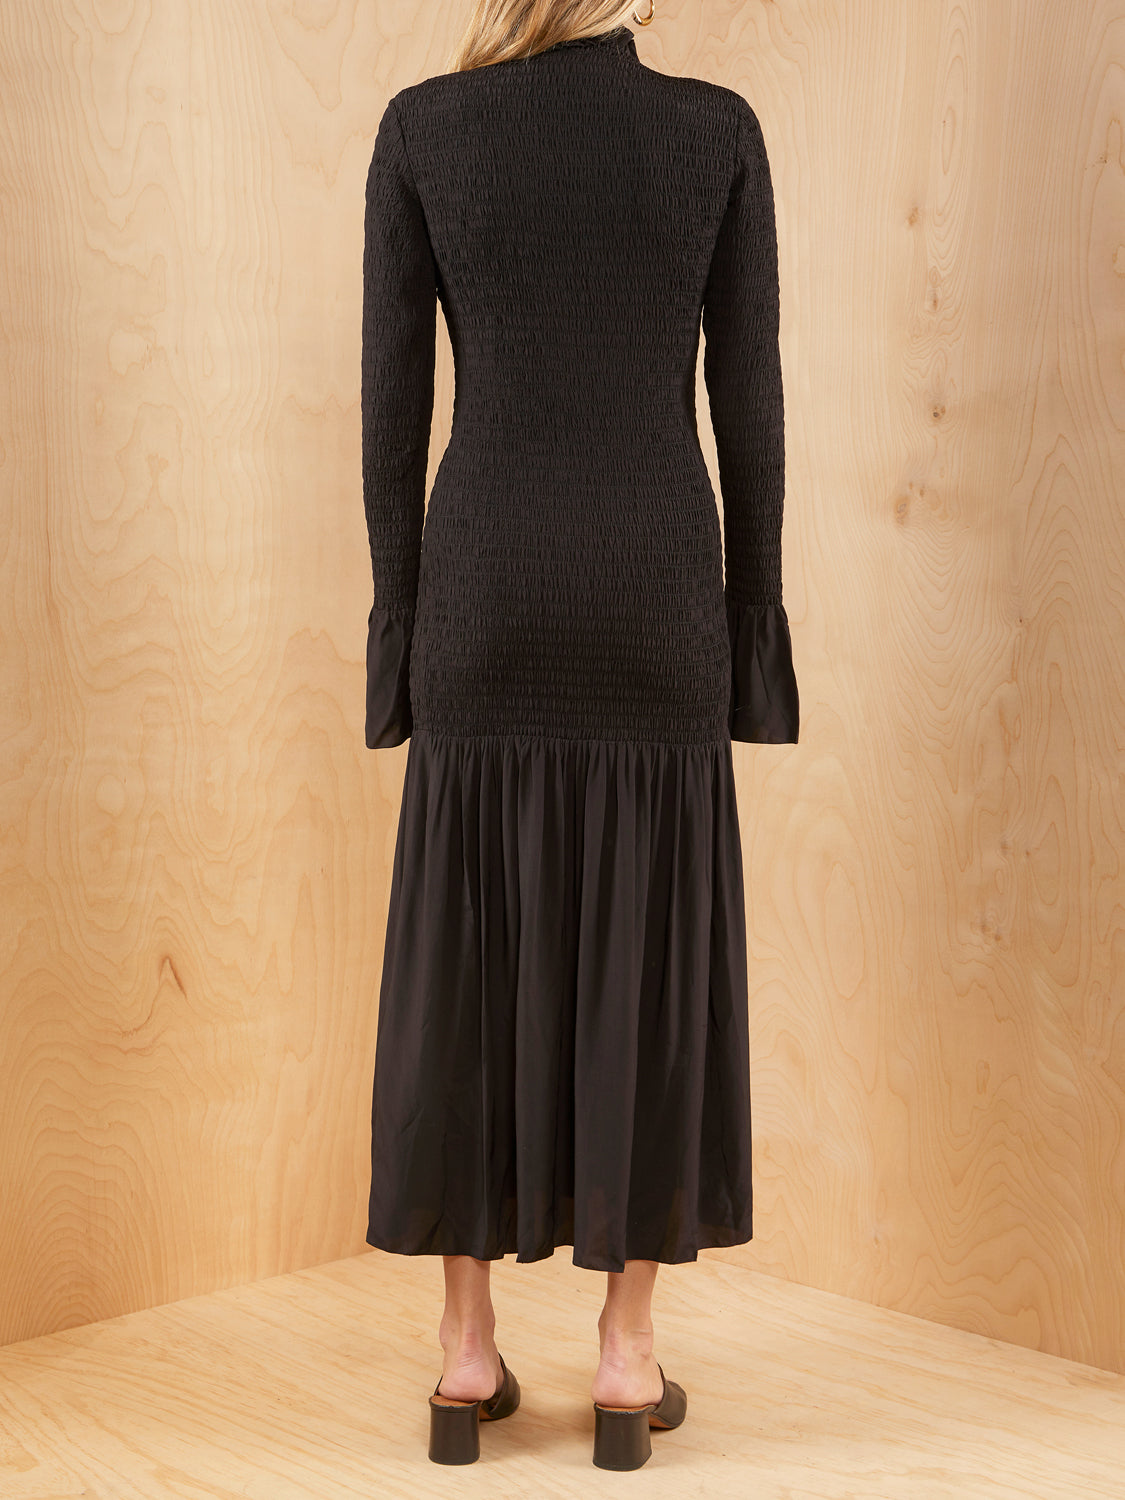 & Other Stories Black Rouched Midi Dress